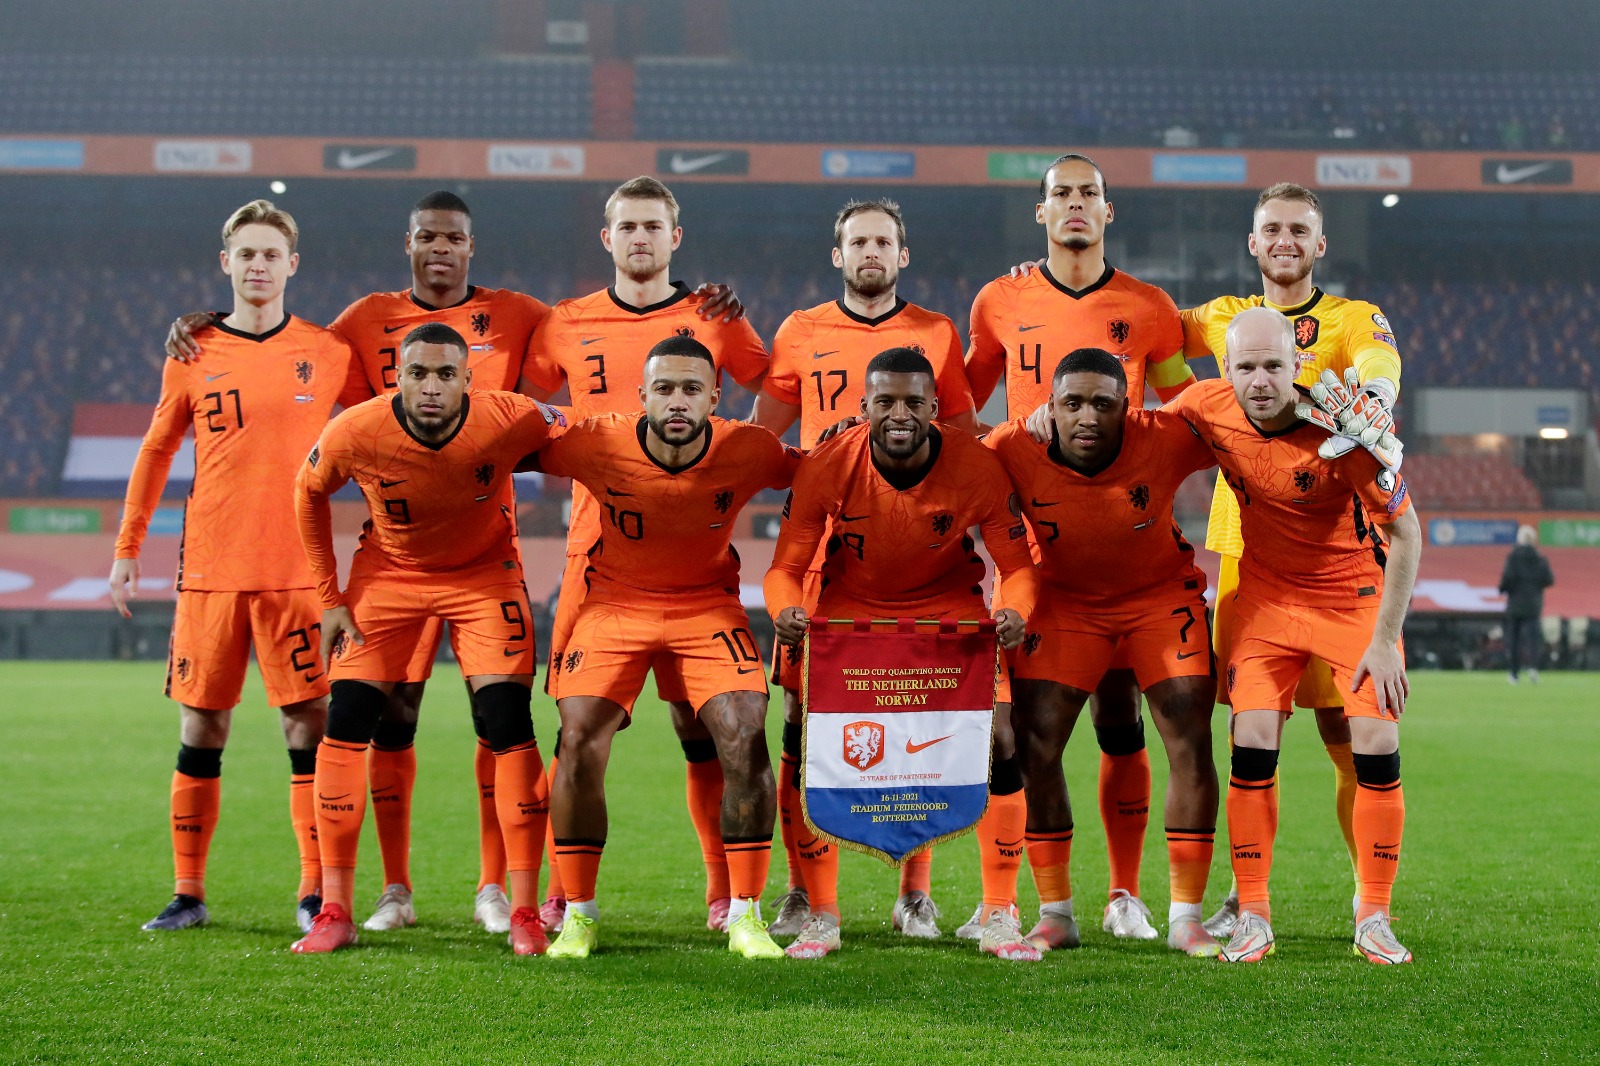 Frenkie de Jong and Memphis Depay star as the Netherlands qualify for